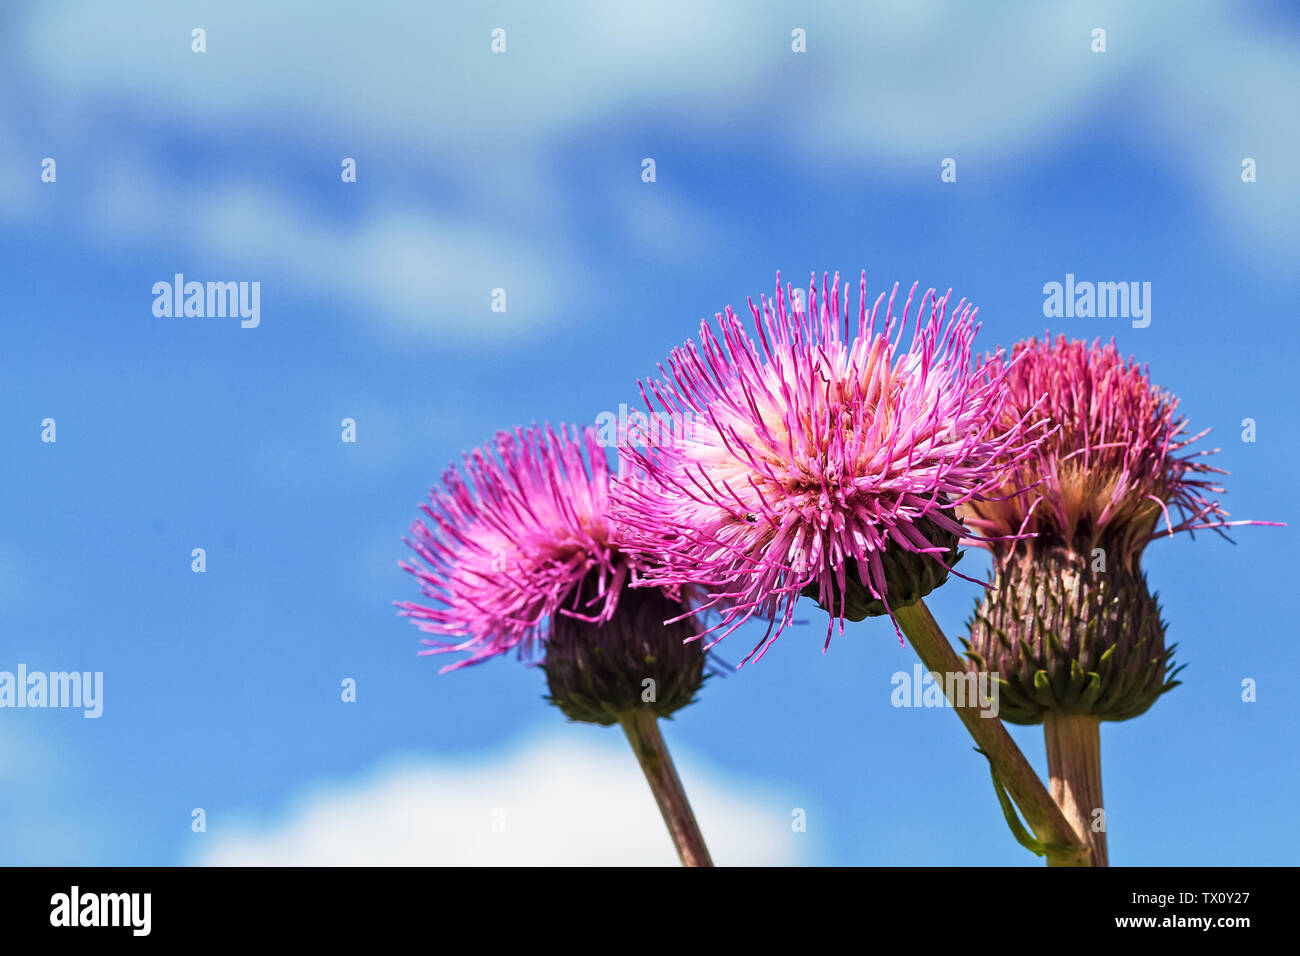 Three melancholy thistle flowers stand together against the summer sky at the rural Finland. Stock Photo